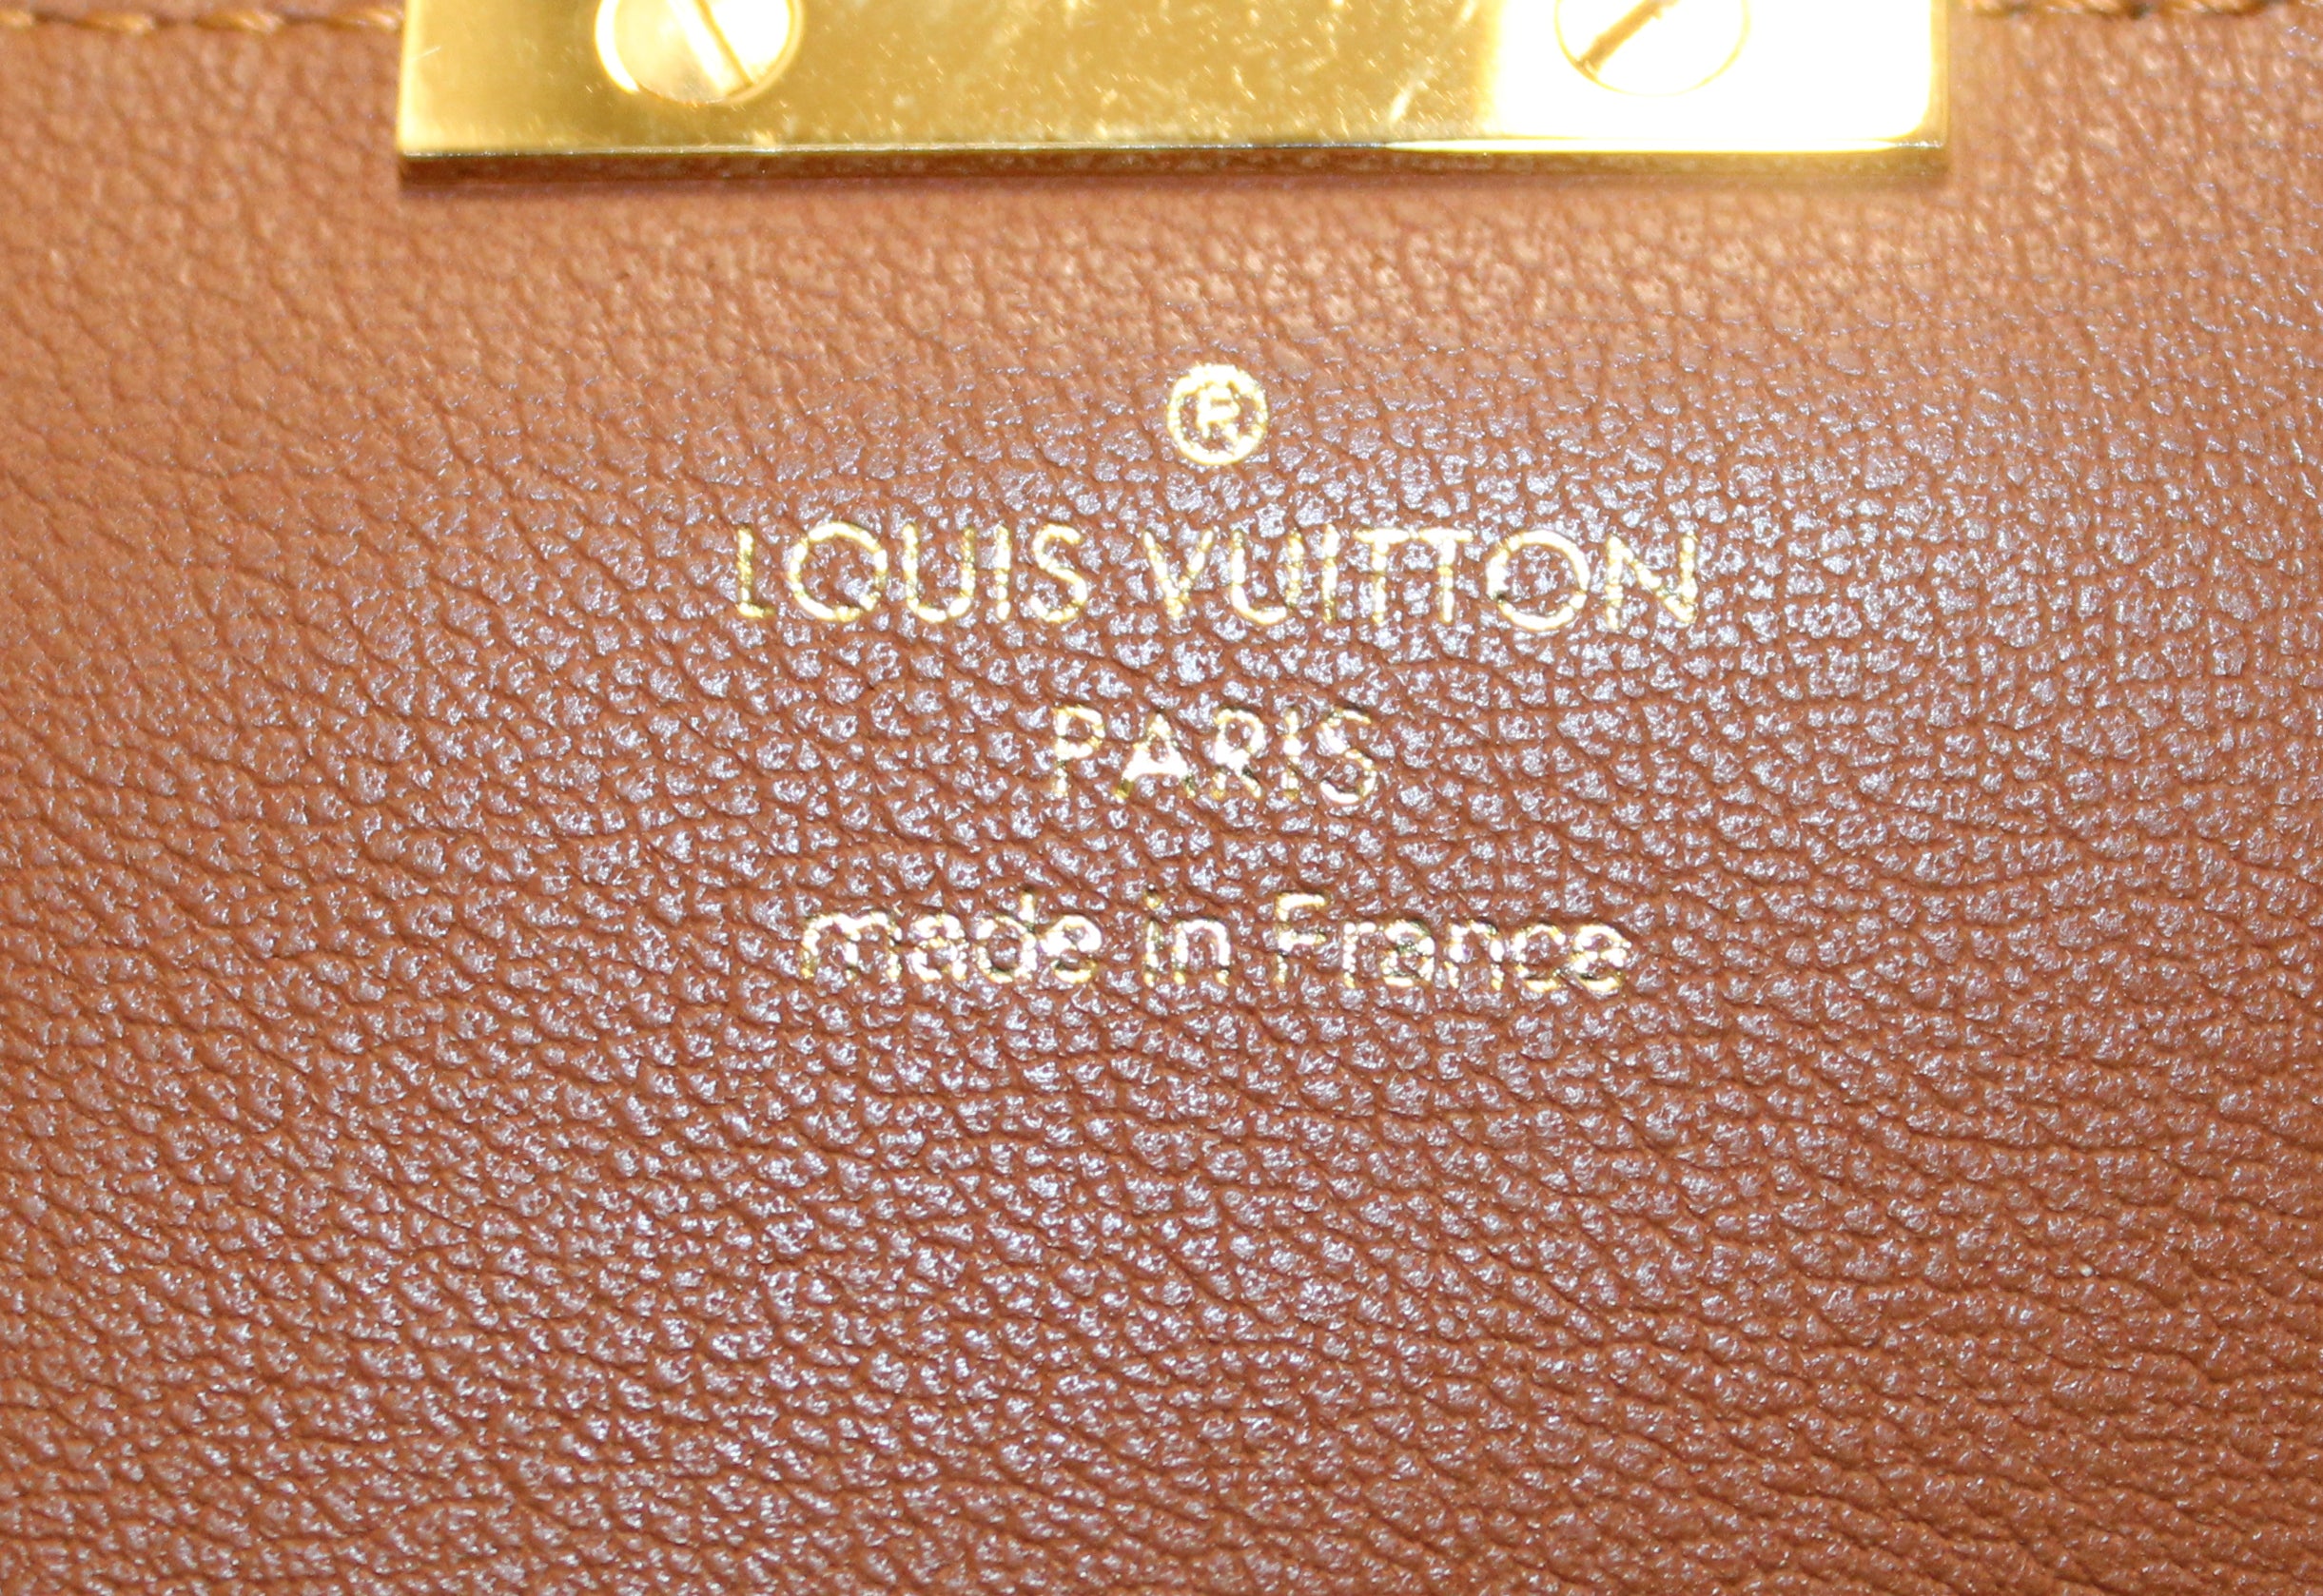 LOUIS VUITTON ELYSEE MONOGRAM WALLET, with gold tone clasp at the front and  red partitioned leather interior with a central zippered pocket and twelve  card slot panels, with dust bag, box and